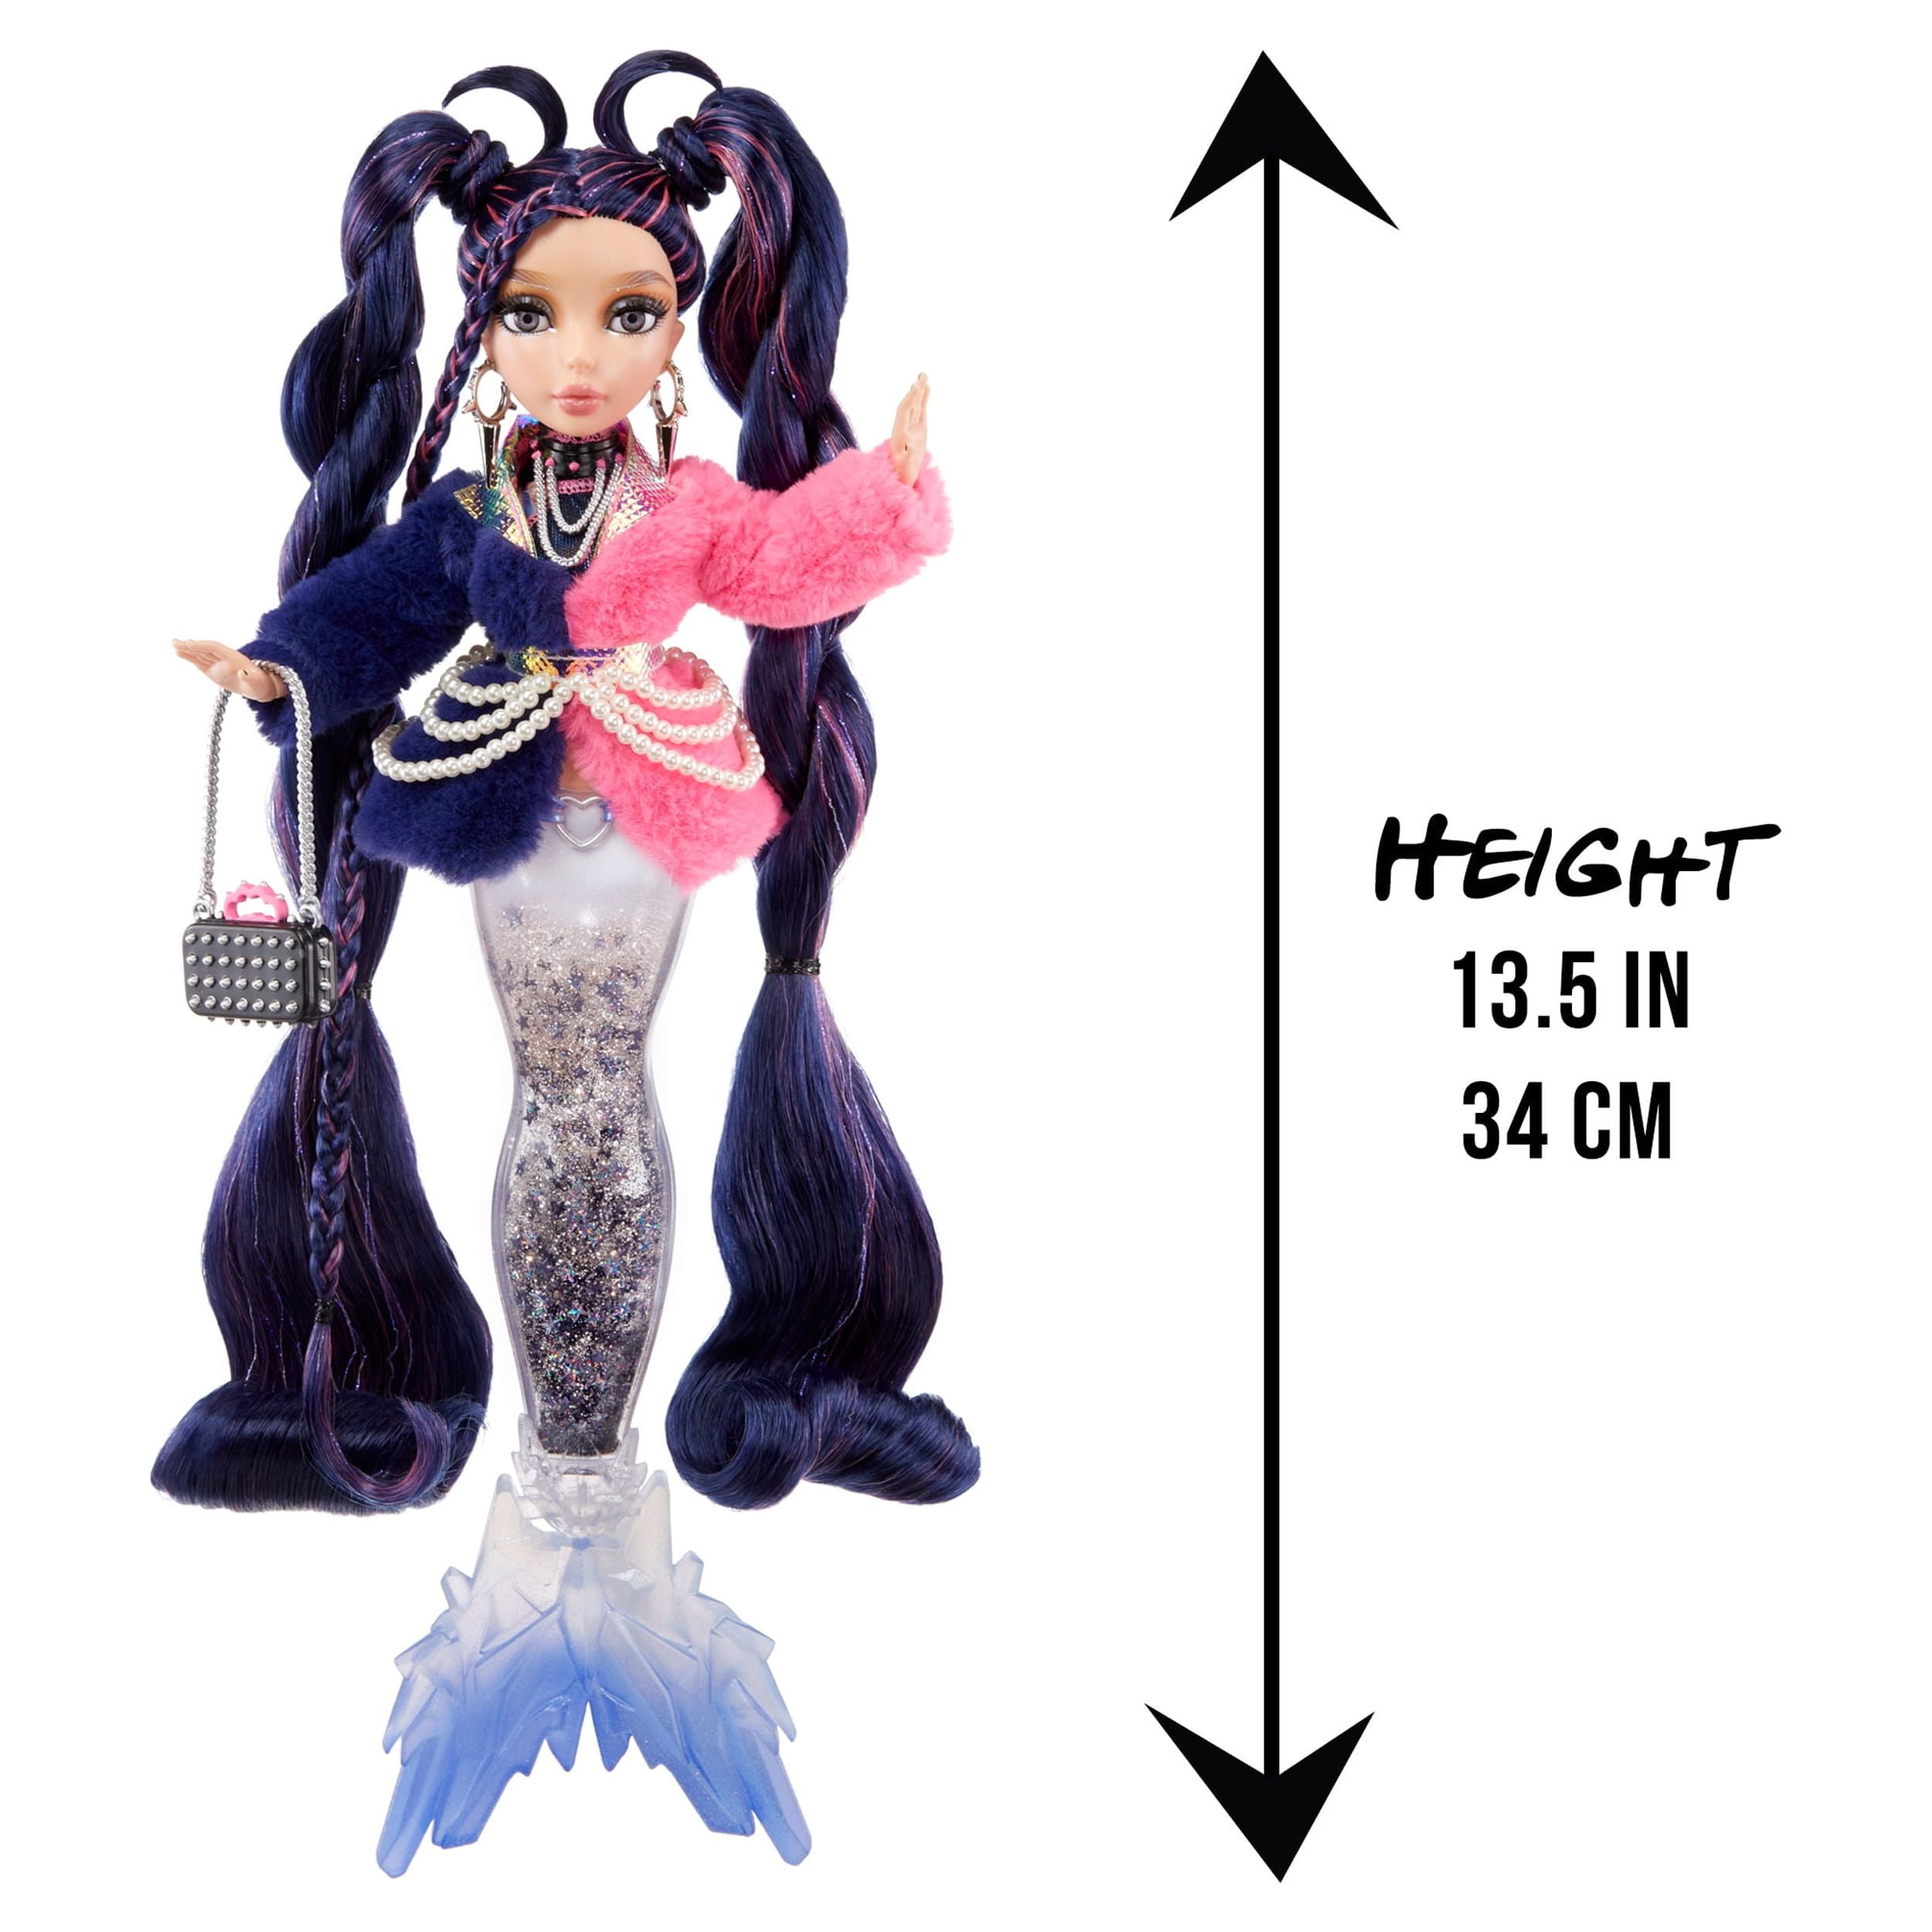 MERMAZE MERMAIDZ™ Winter Waves Gwen™ Mermaid Fashion Doll with Color Change  Fin, Glitter-Filled Tail and Accessories 13.5 Inch